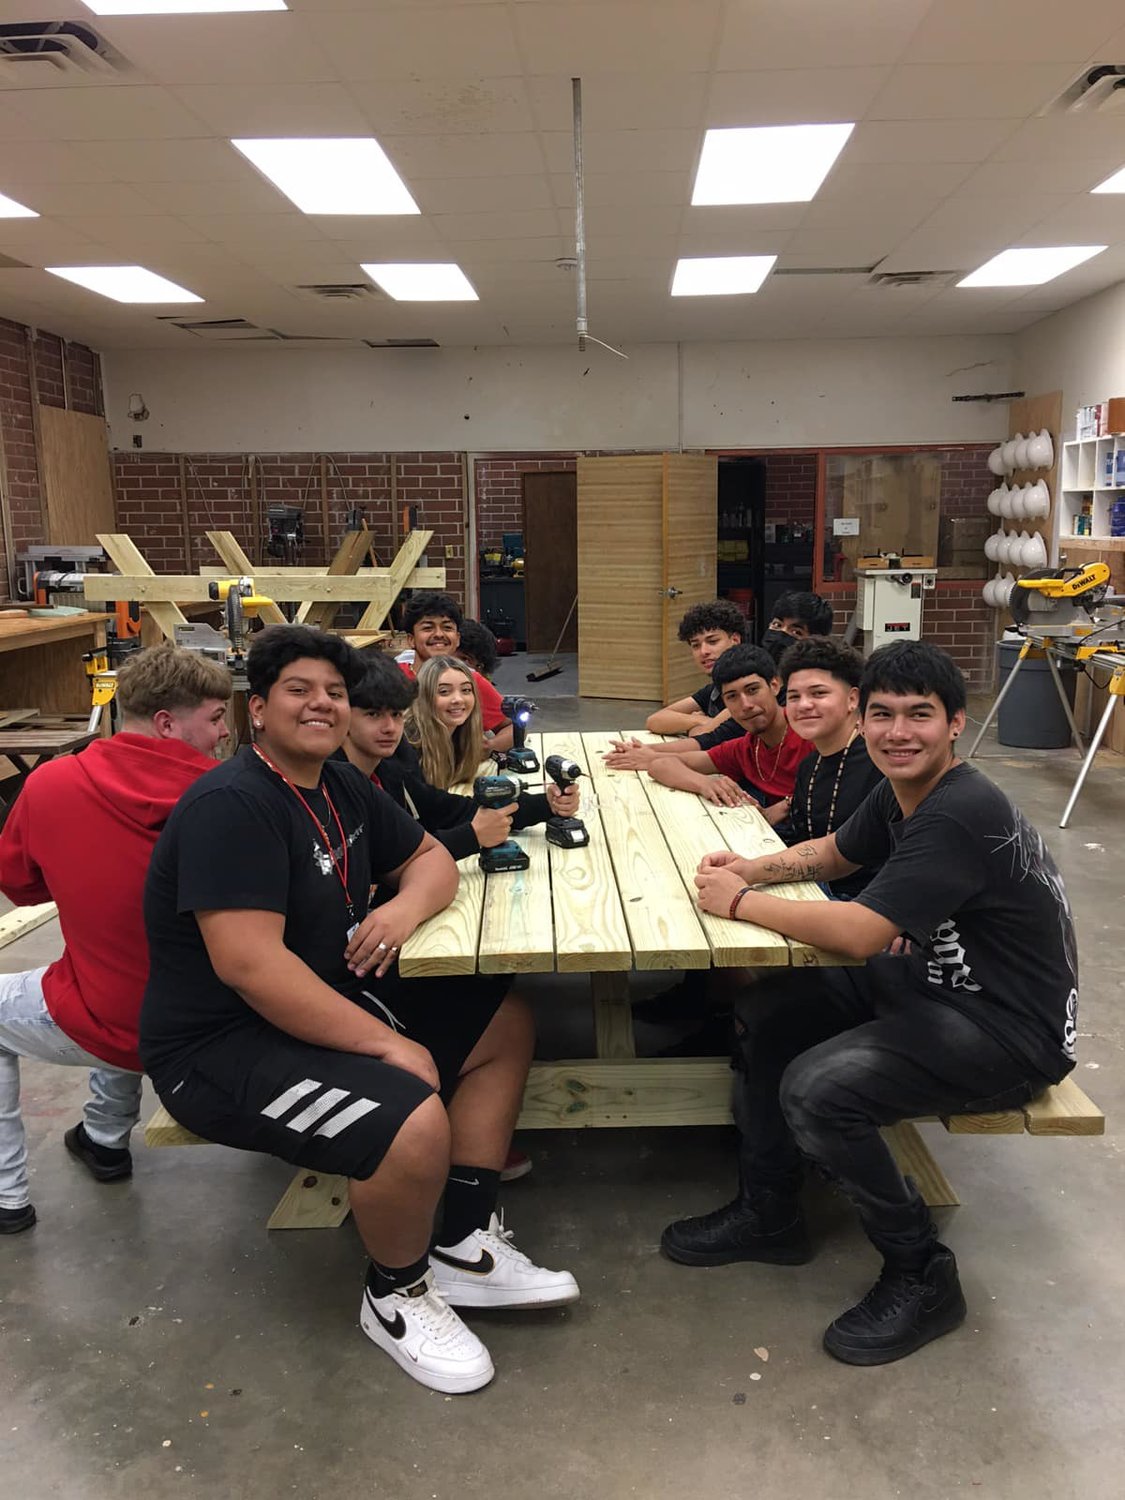 LHS Building/Trades students have another happy customer!  Tables are $300 and orders can be placed with Mr. Armour or Mrs. Ayers (armourk@hendry-schools.net or ayersa@hendry-schools.net) or by calling the school.